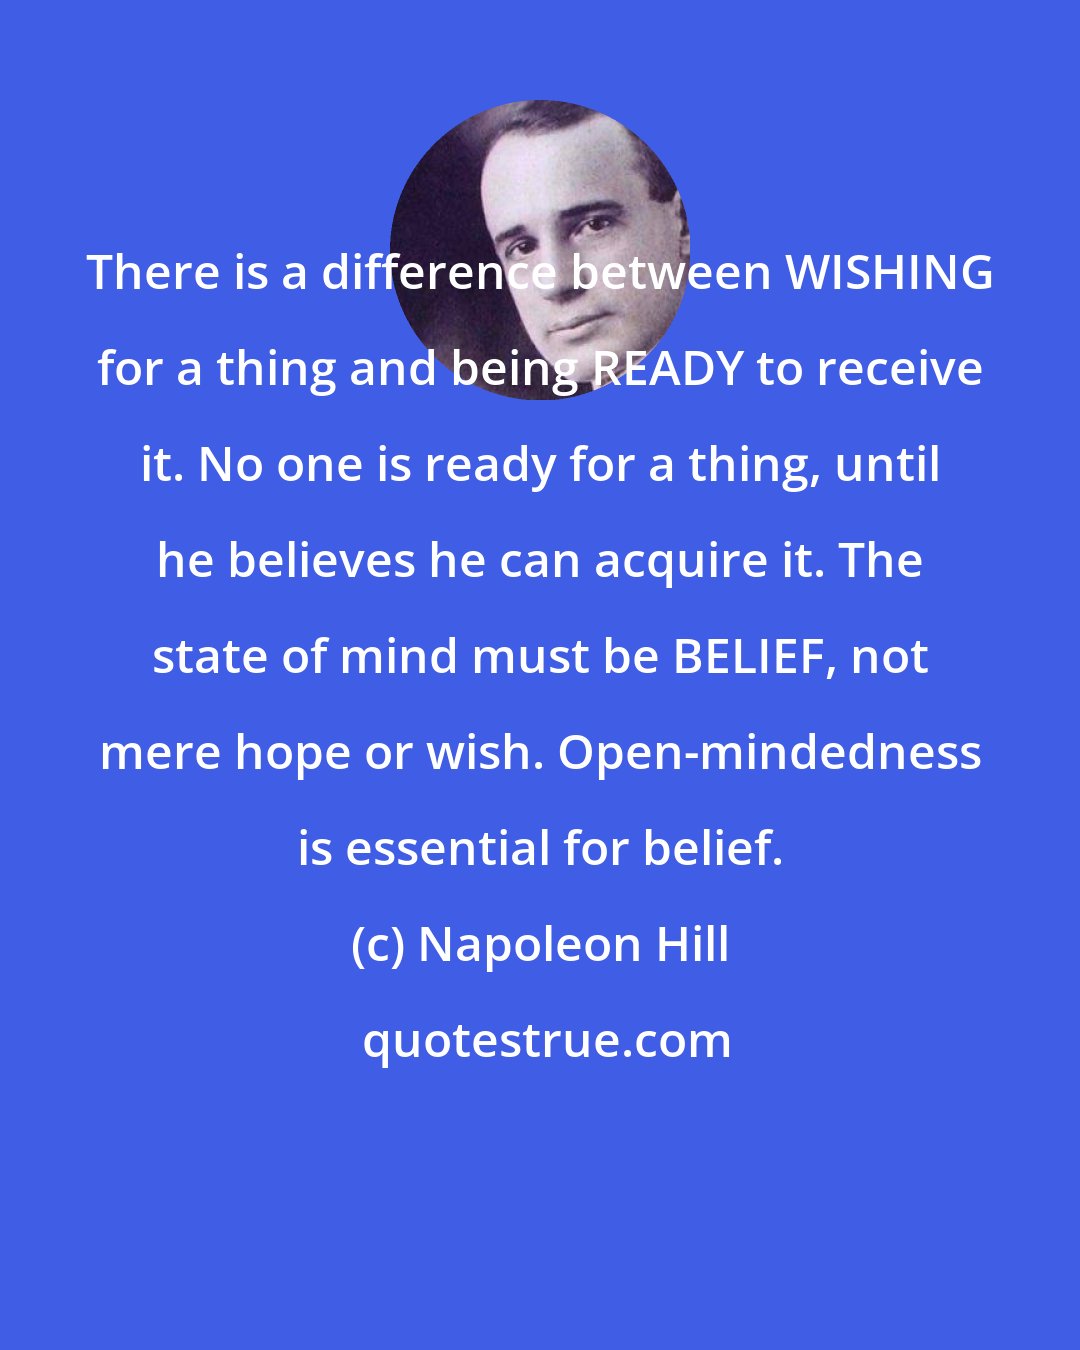 Napoleon Hill: There is a difference between WISHING for a thing and being READY to receive it. No one is ready for a thing, until he believes he can acquire it. The state of mind must be BELIEF, not mere hope or wish. Open-mindedness is essential for belief.